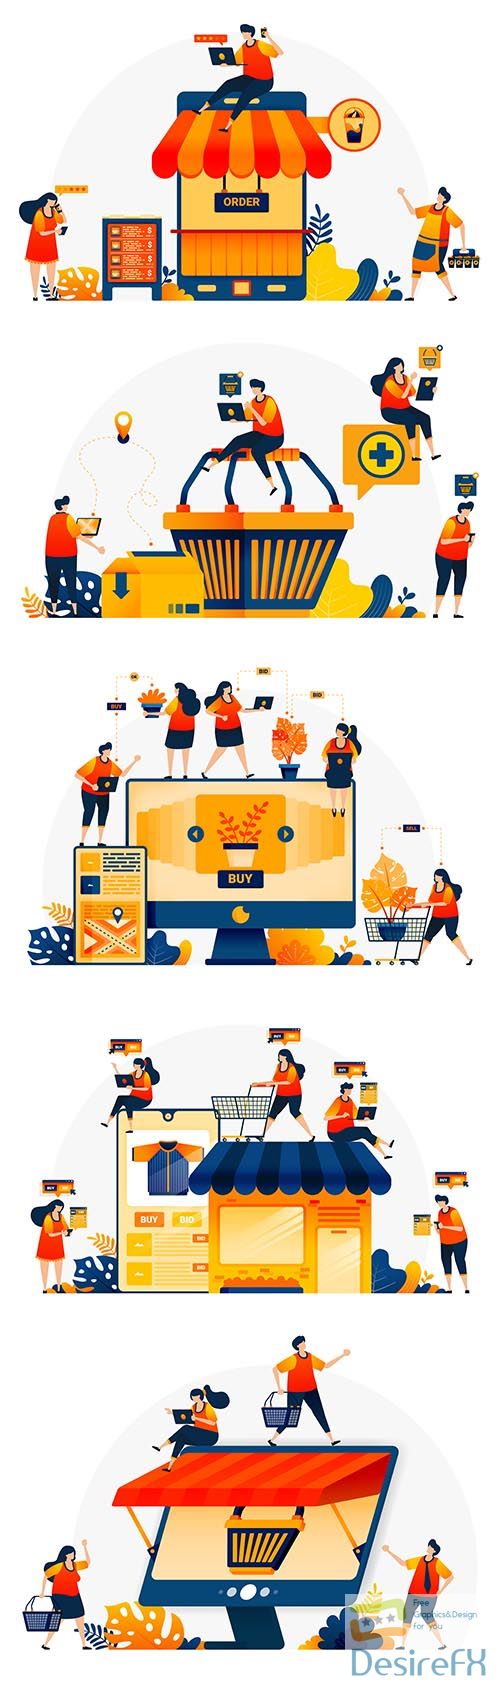 Illustration of shopping cart with people around to shop e-commerce